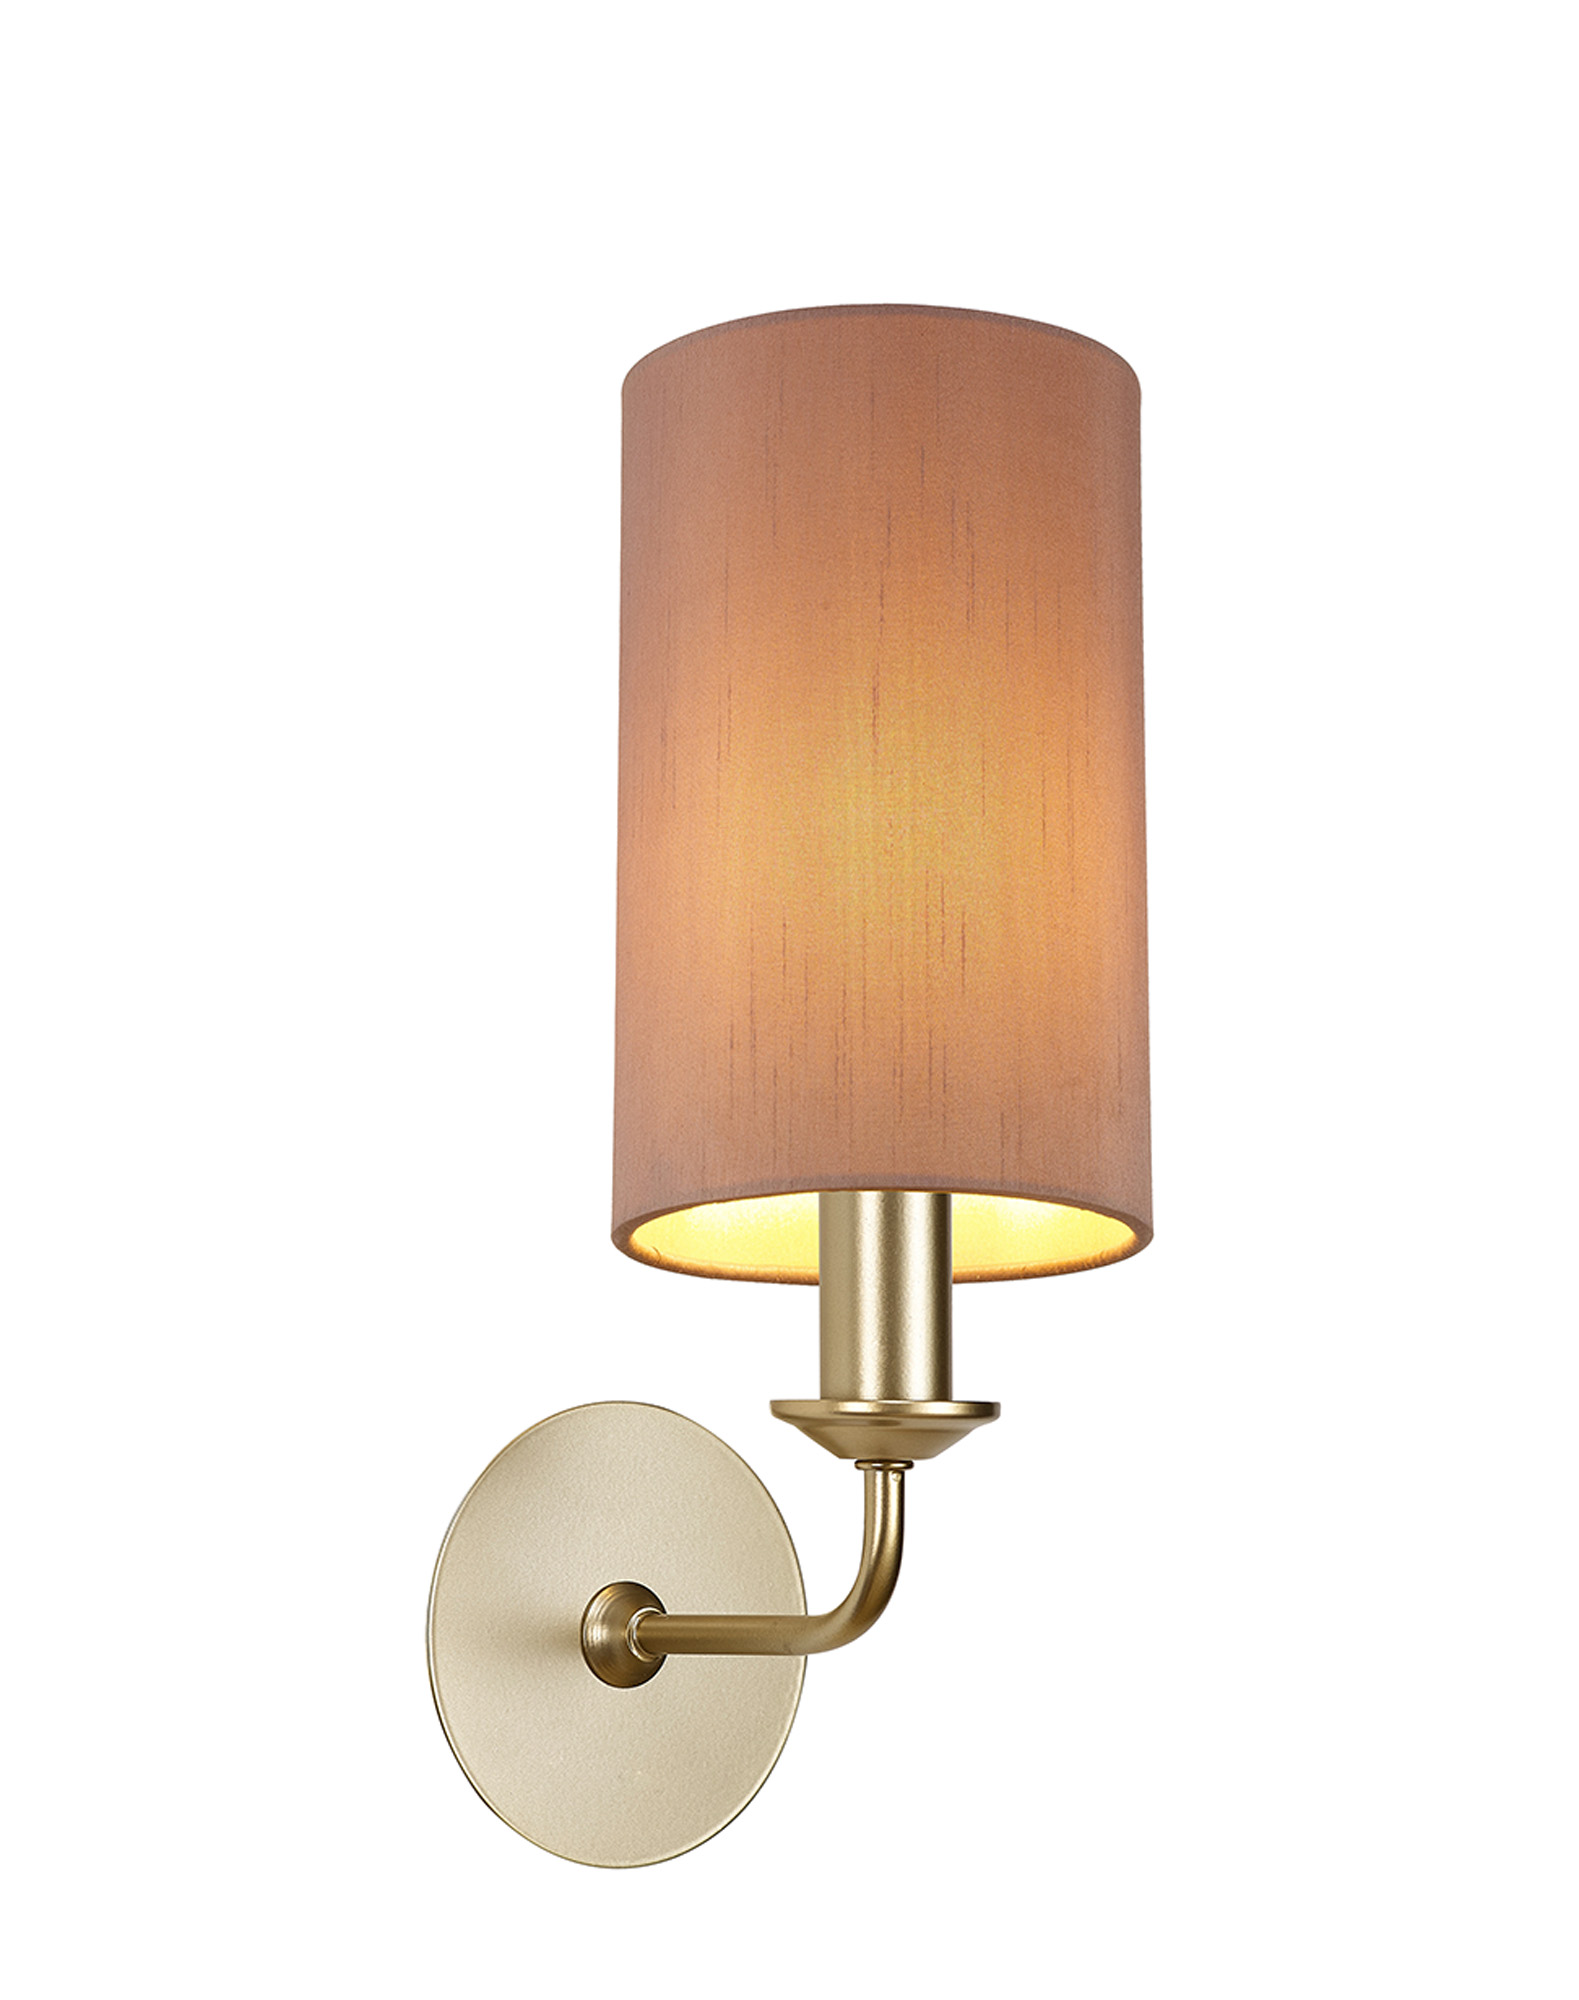 DK0958  Banyan Wall Lamp 1 Light Champagne Gold; Taupe/Halo Gold